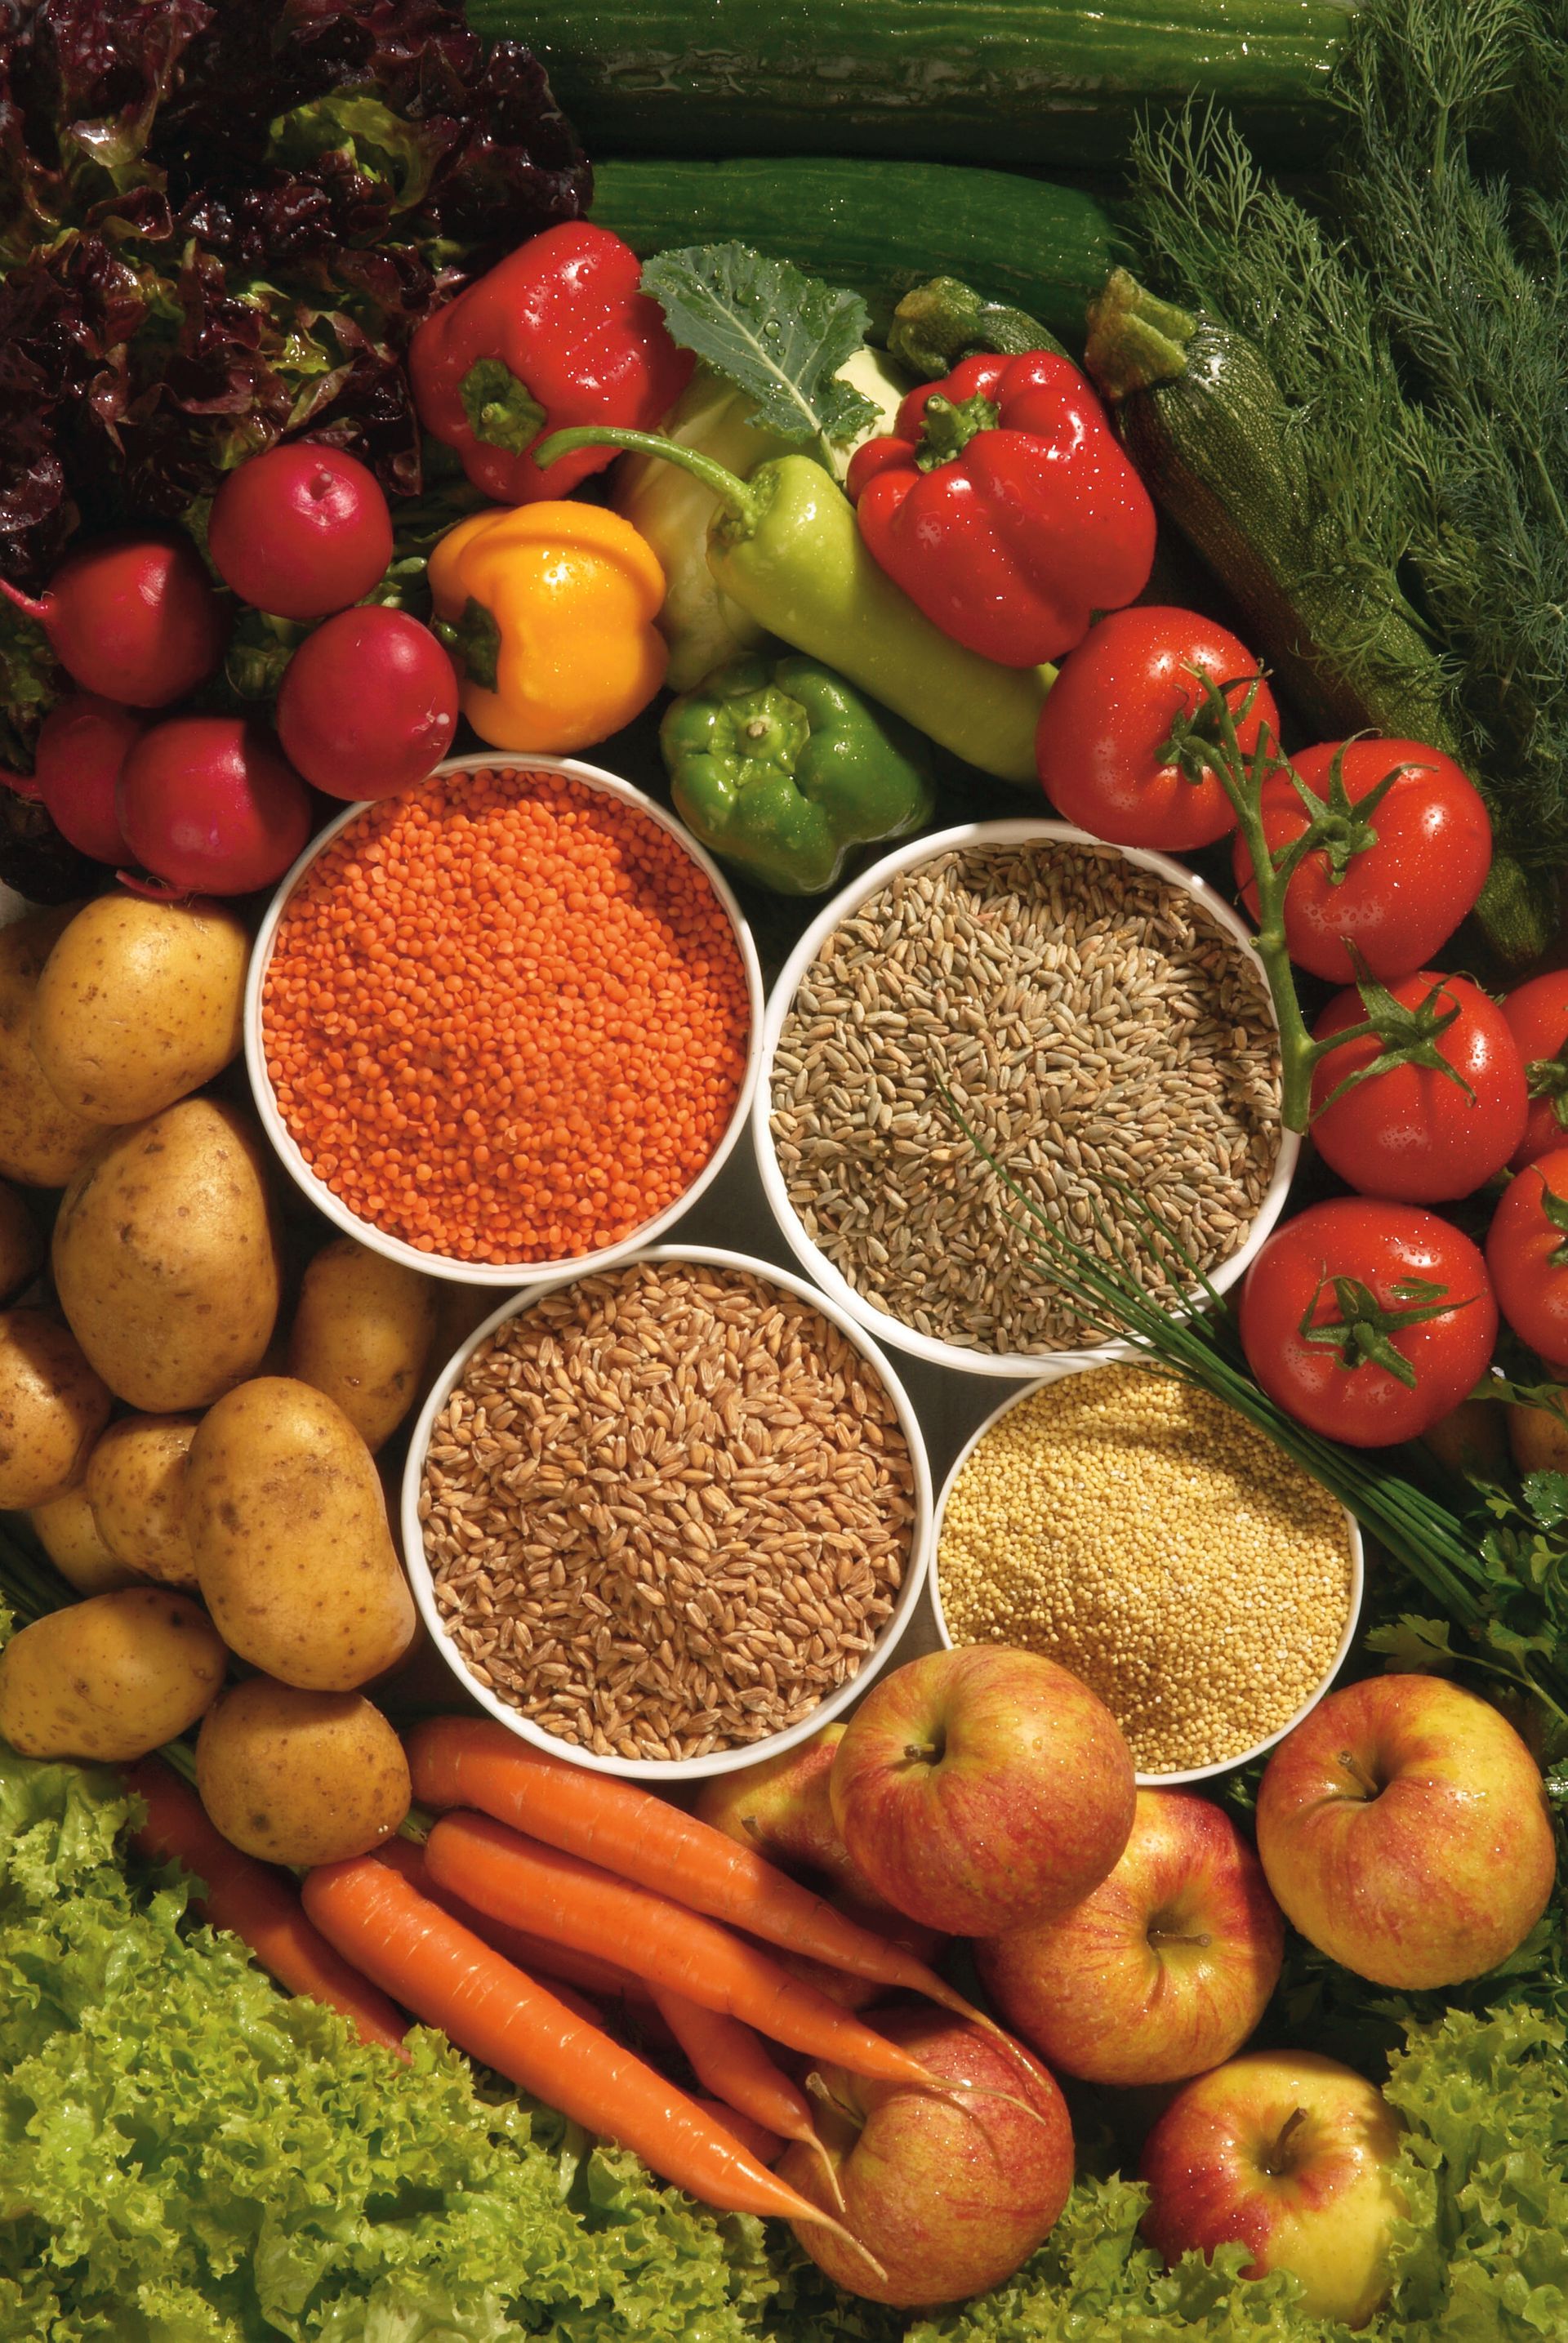 A spread of fruits, vegetables, and grains.